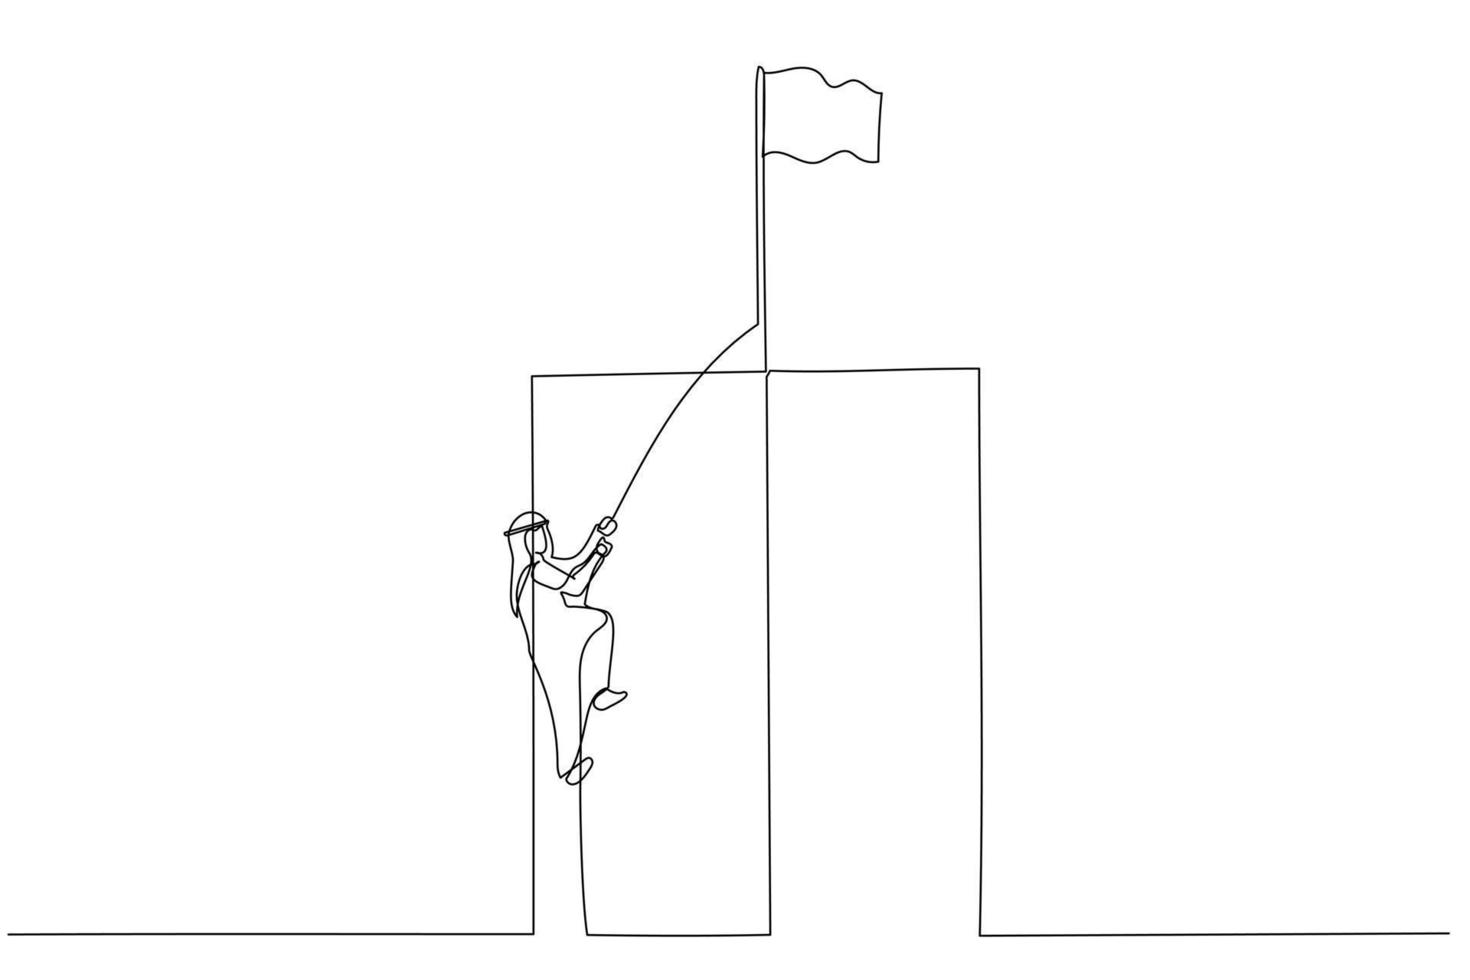 Drawing of arab man climbing a cliff on a rope concept of career growth. Single continuous line art style vector